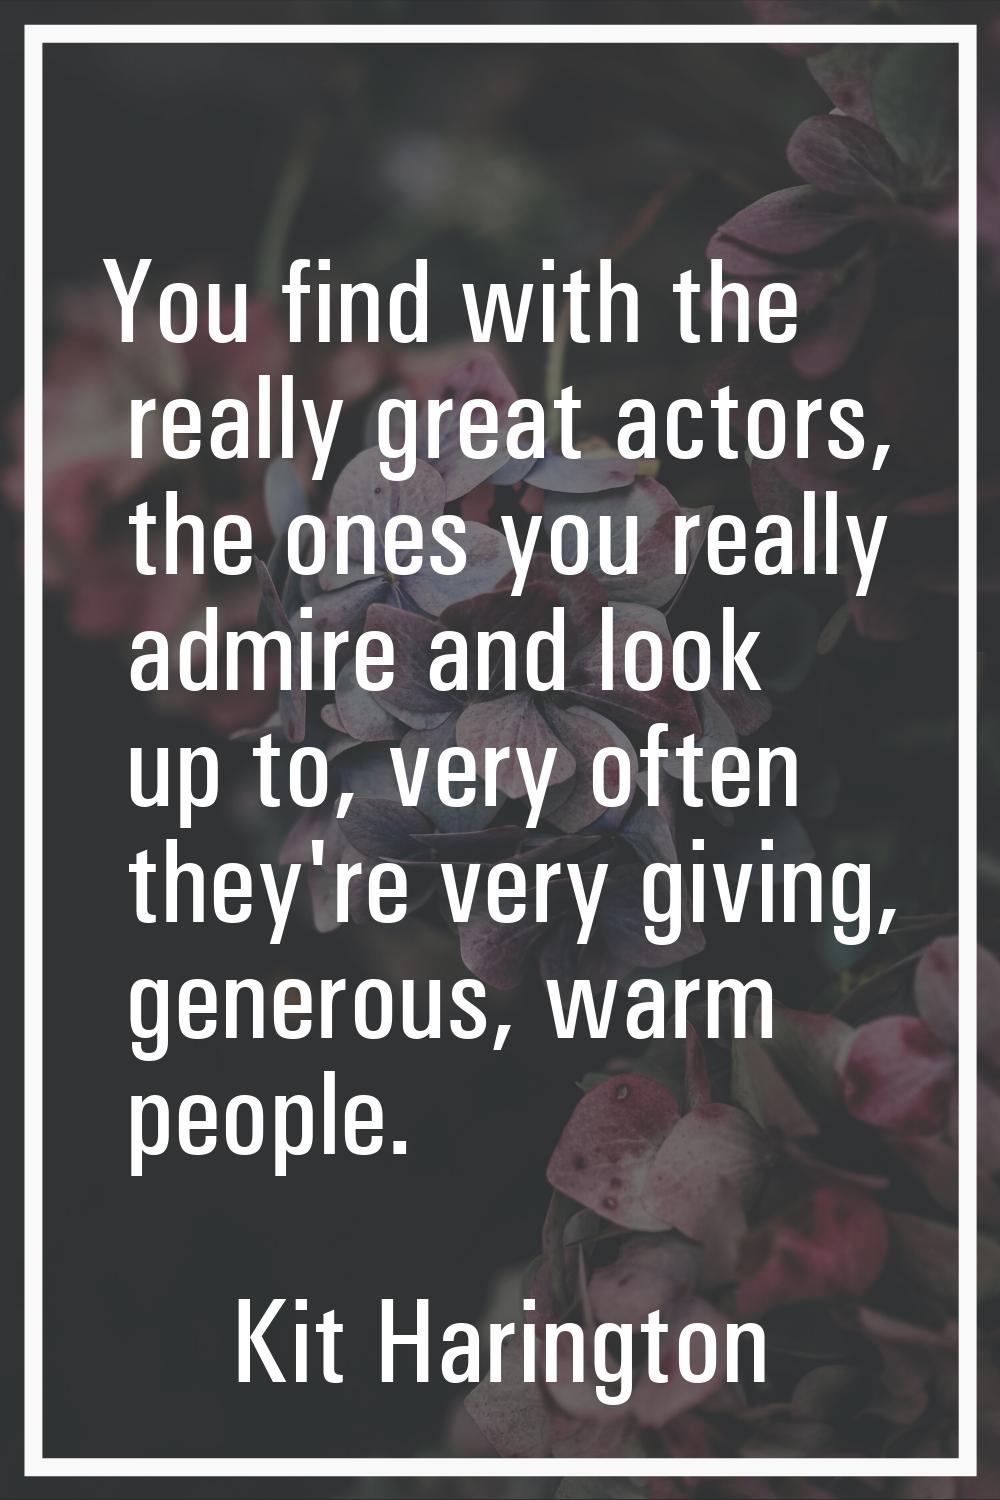 You find with the really great actors, the ones you really admire and look up to, very often they'r